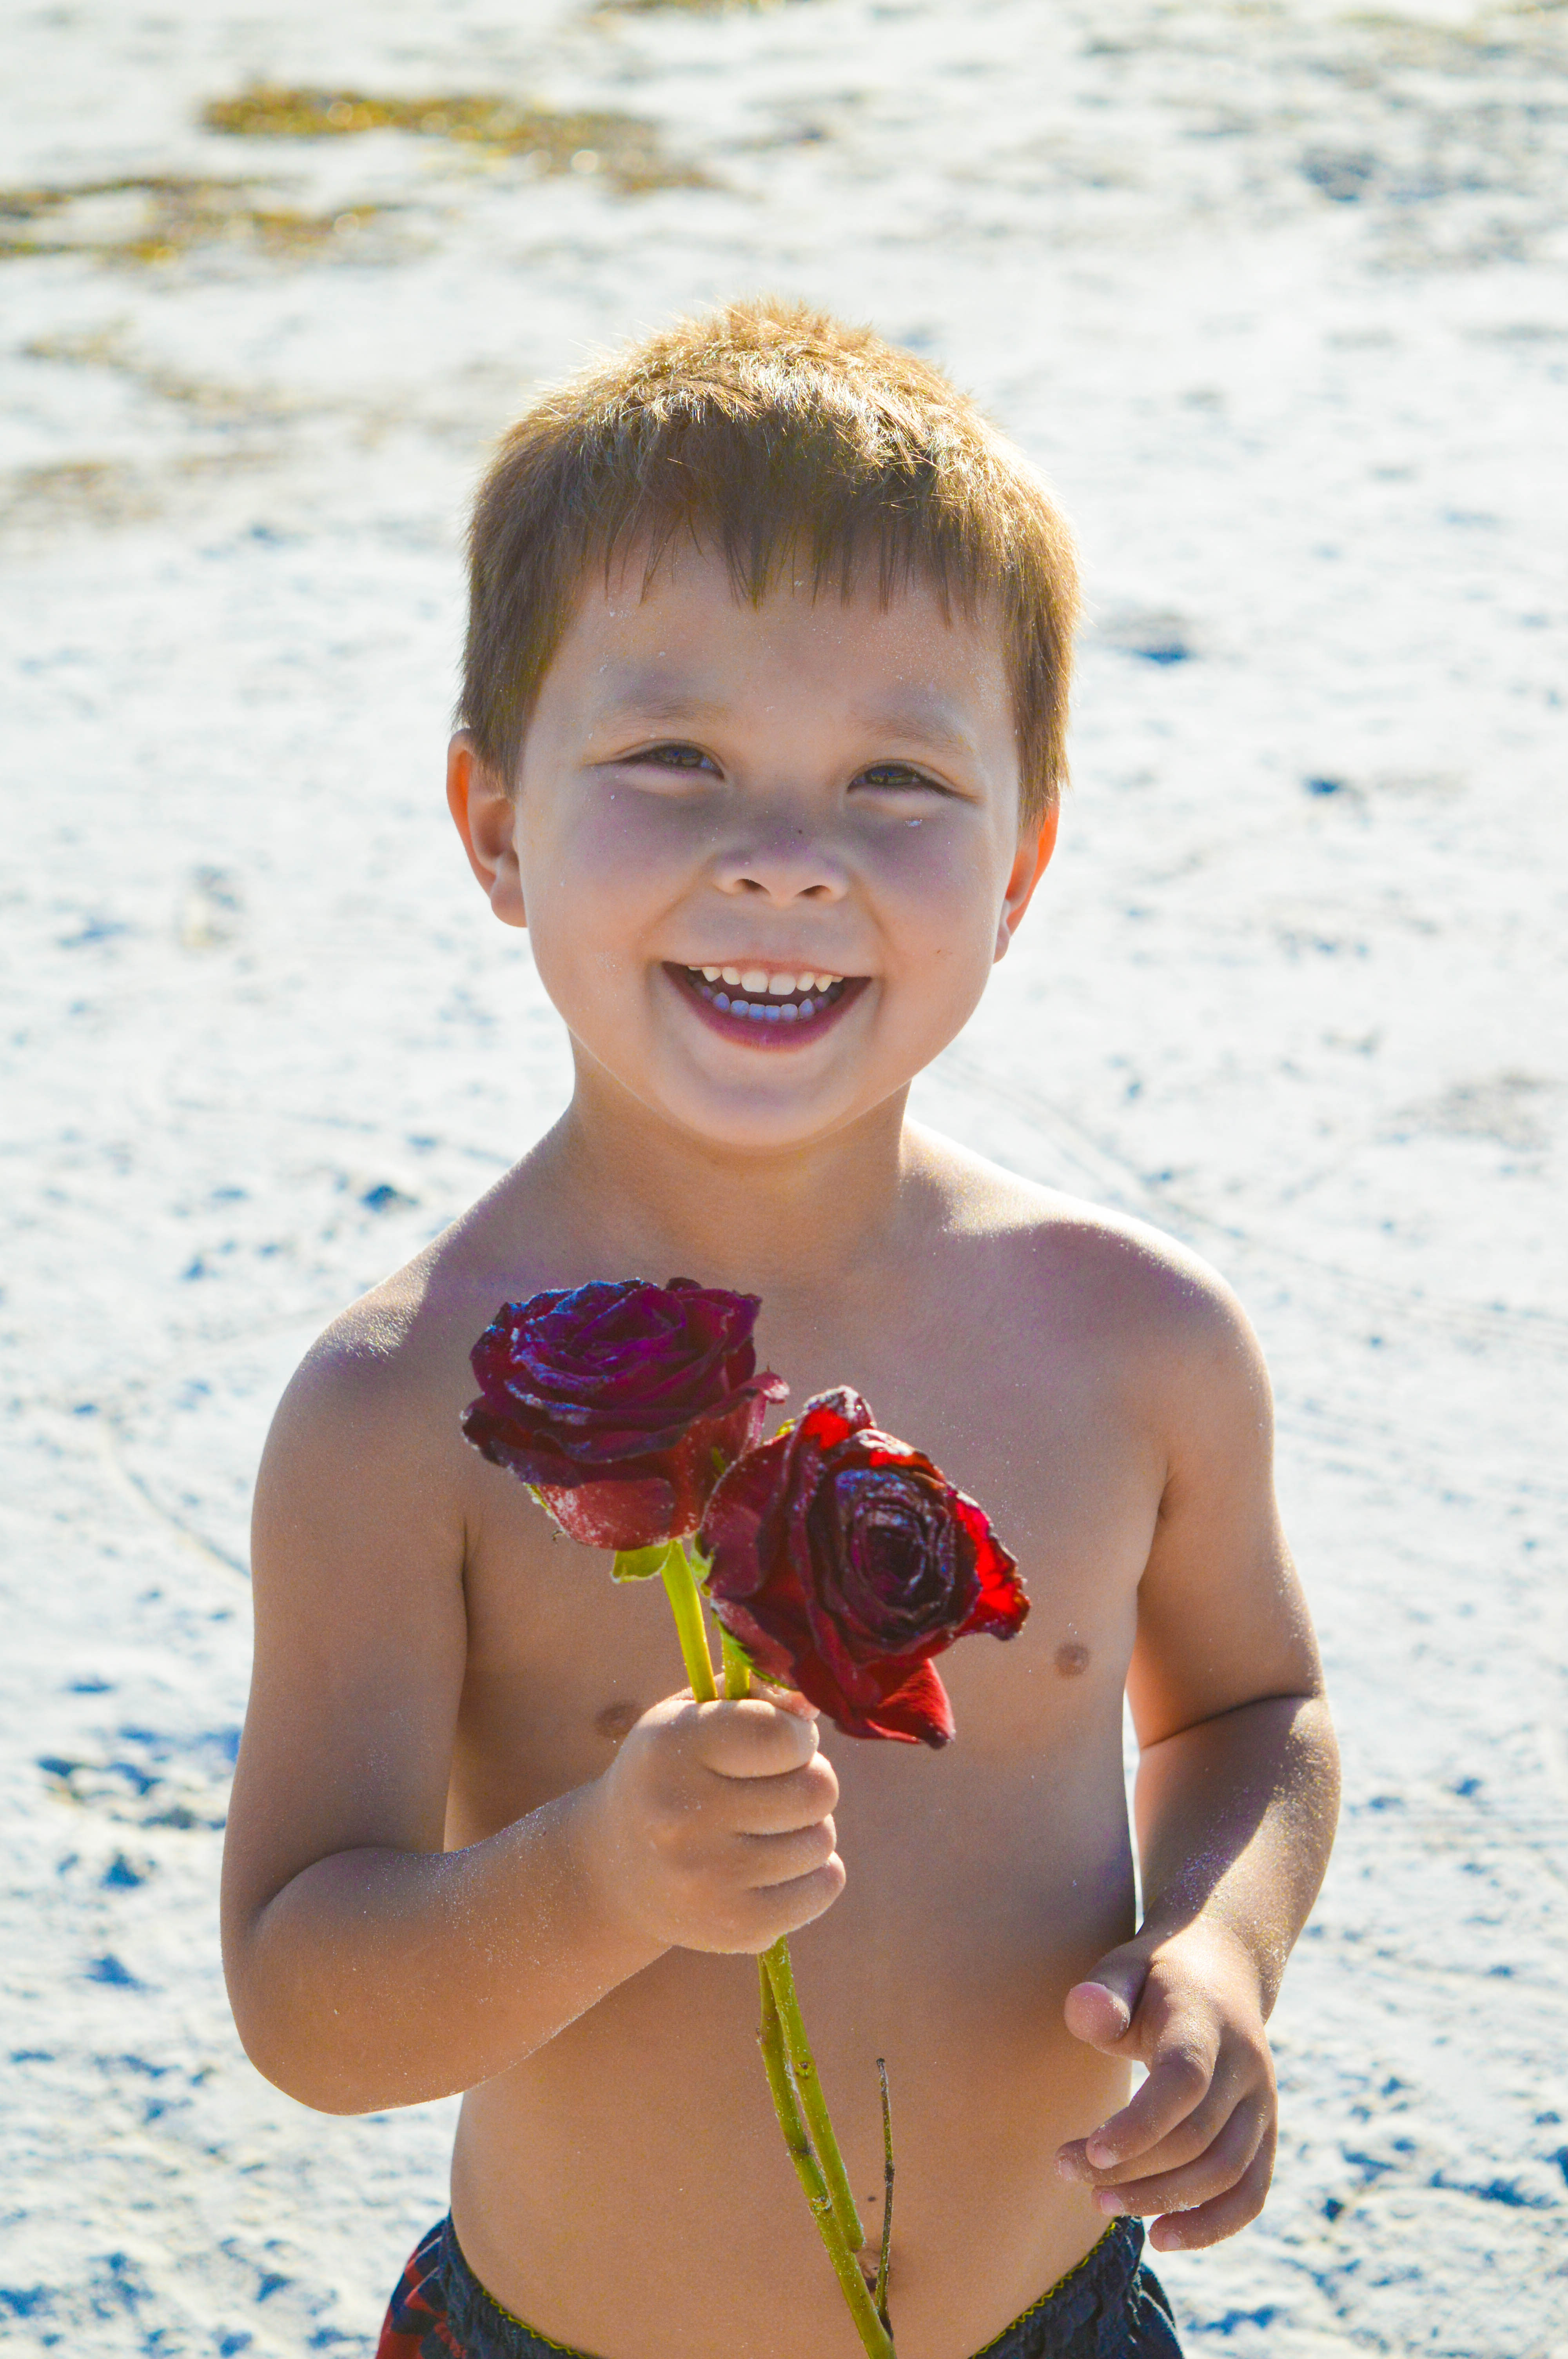 My son Aiden at the beach April, 2015